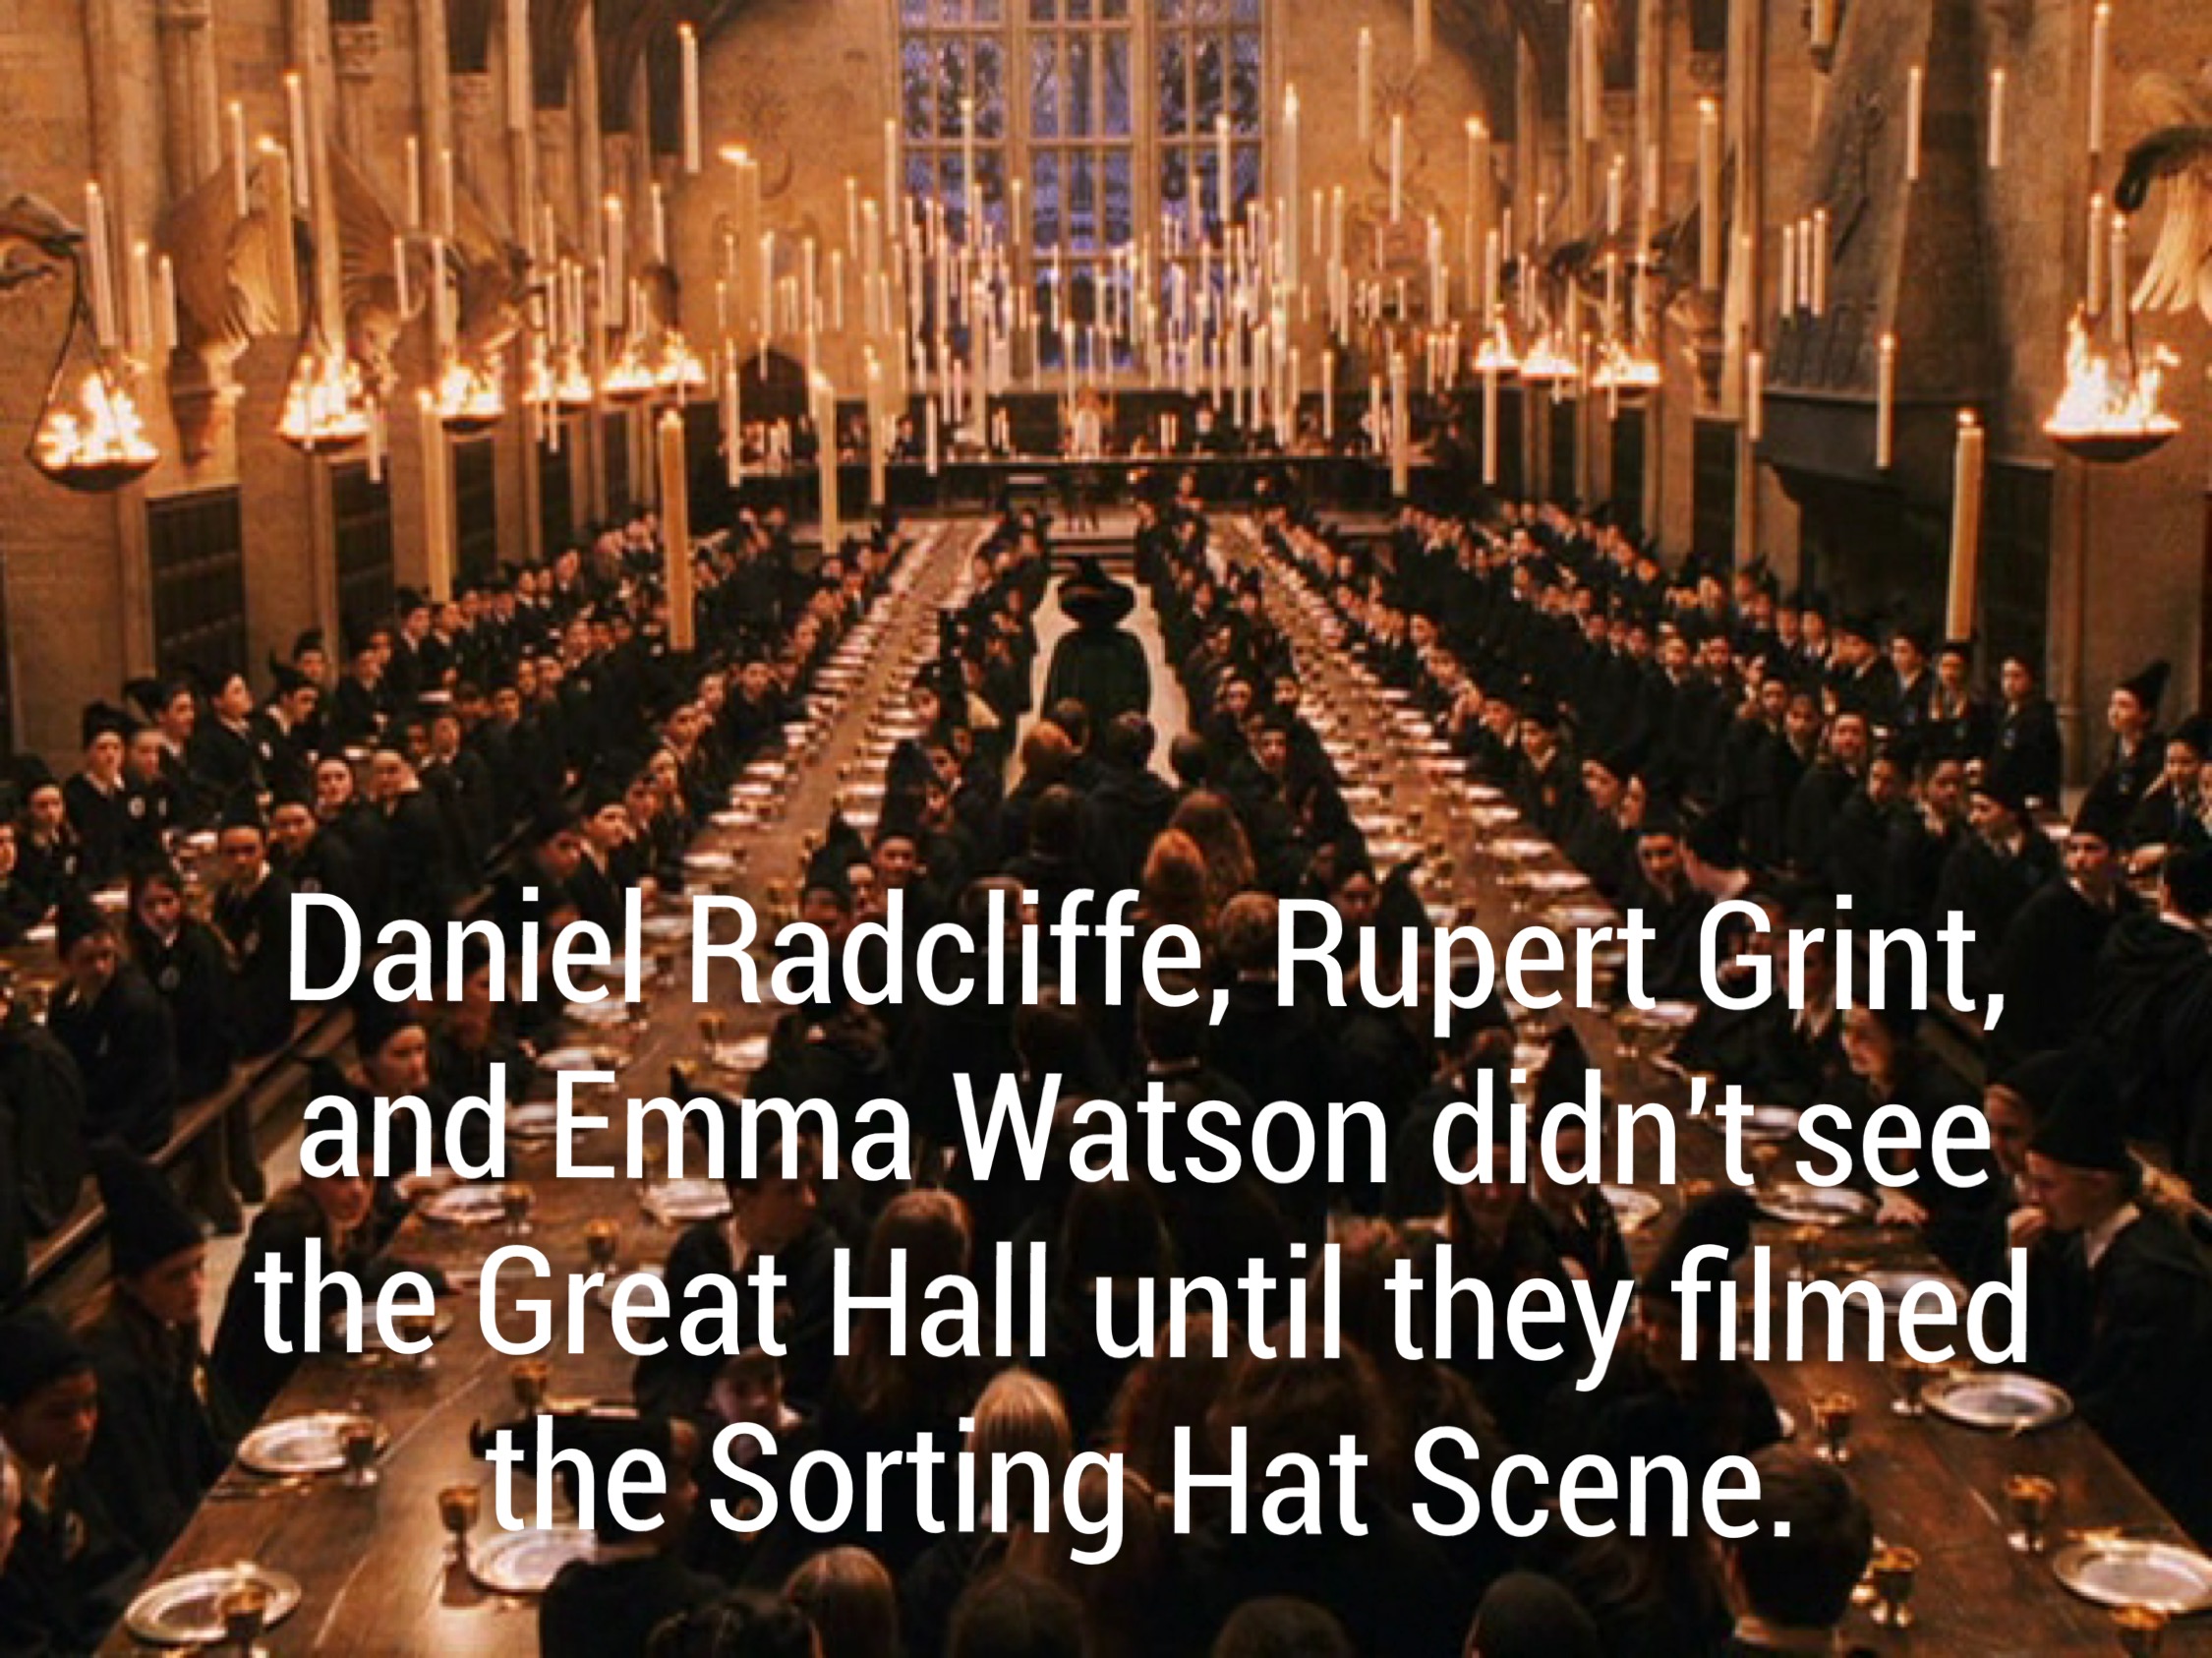 harry potter great hall - Daniel Radcliffe, Rupert Grint, and Emma Watson didn't see the Great Hall until they filmed the Sorting Hat Scene.